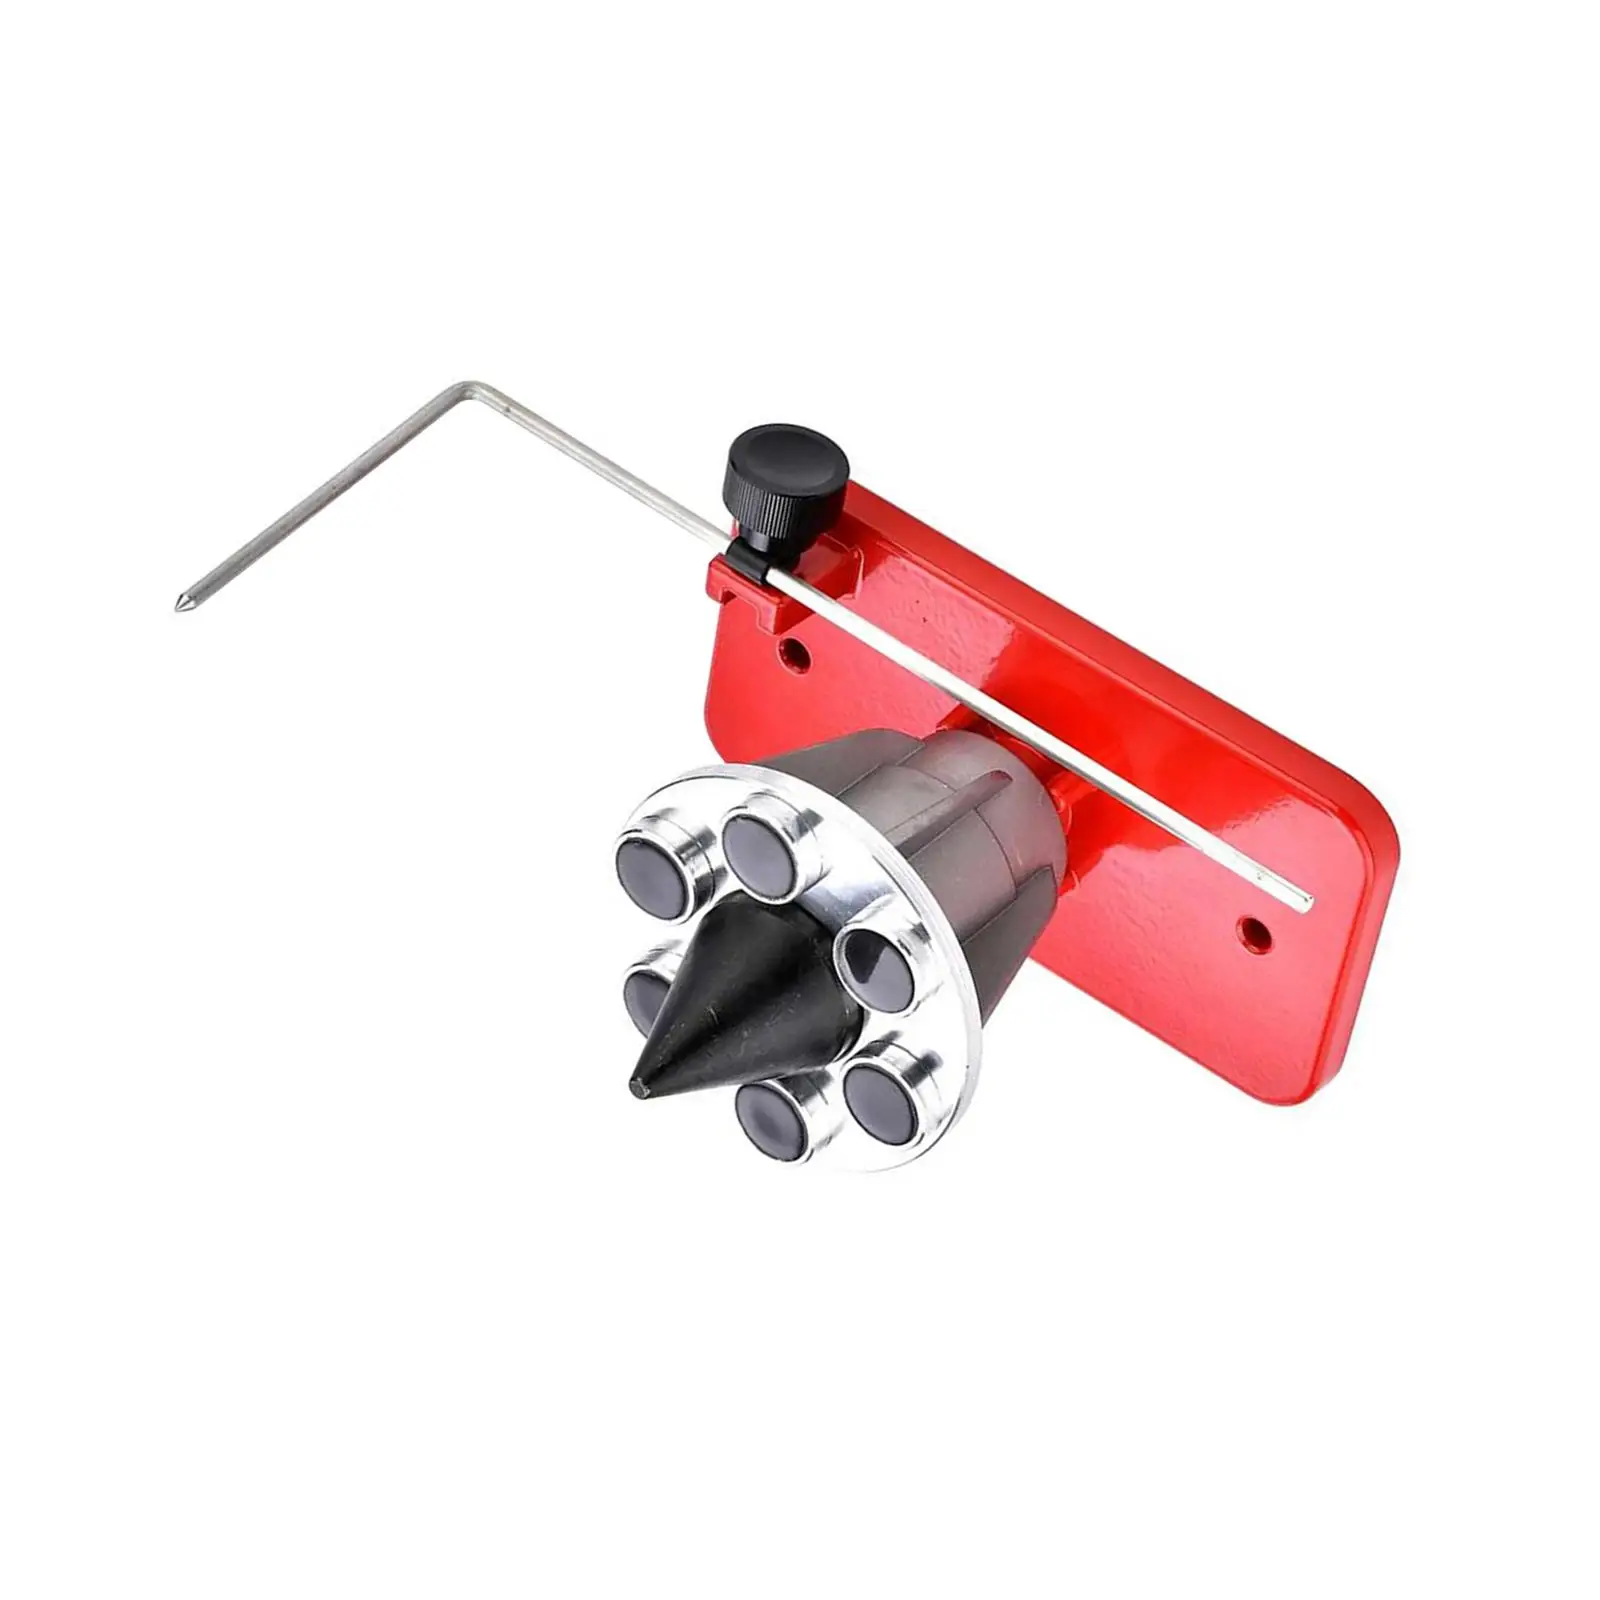 Universal Blade Balancer Reduced Vibration Wall Mount Red 20cm 339075B Balance Blade after Sharpening for All Lawnmower Parts